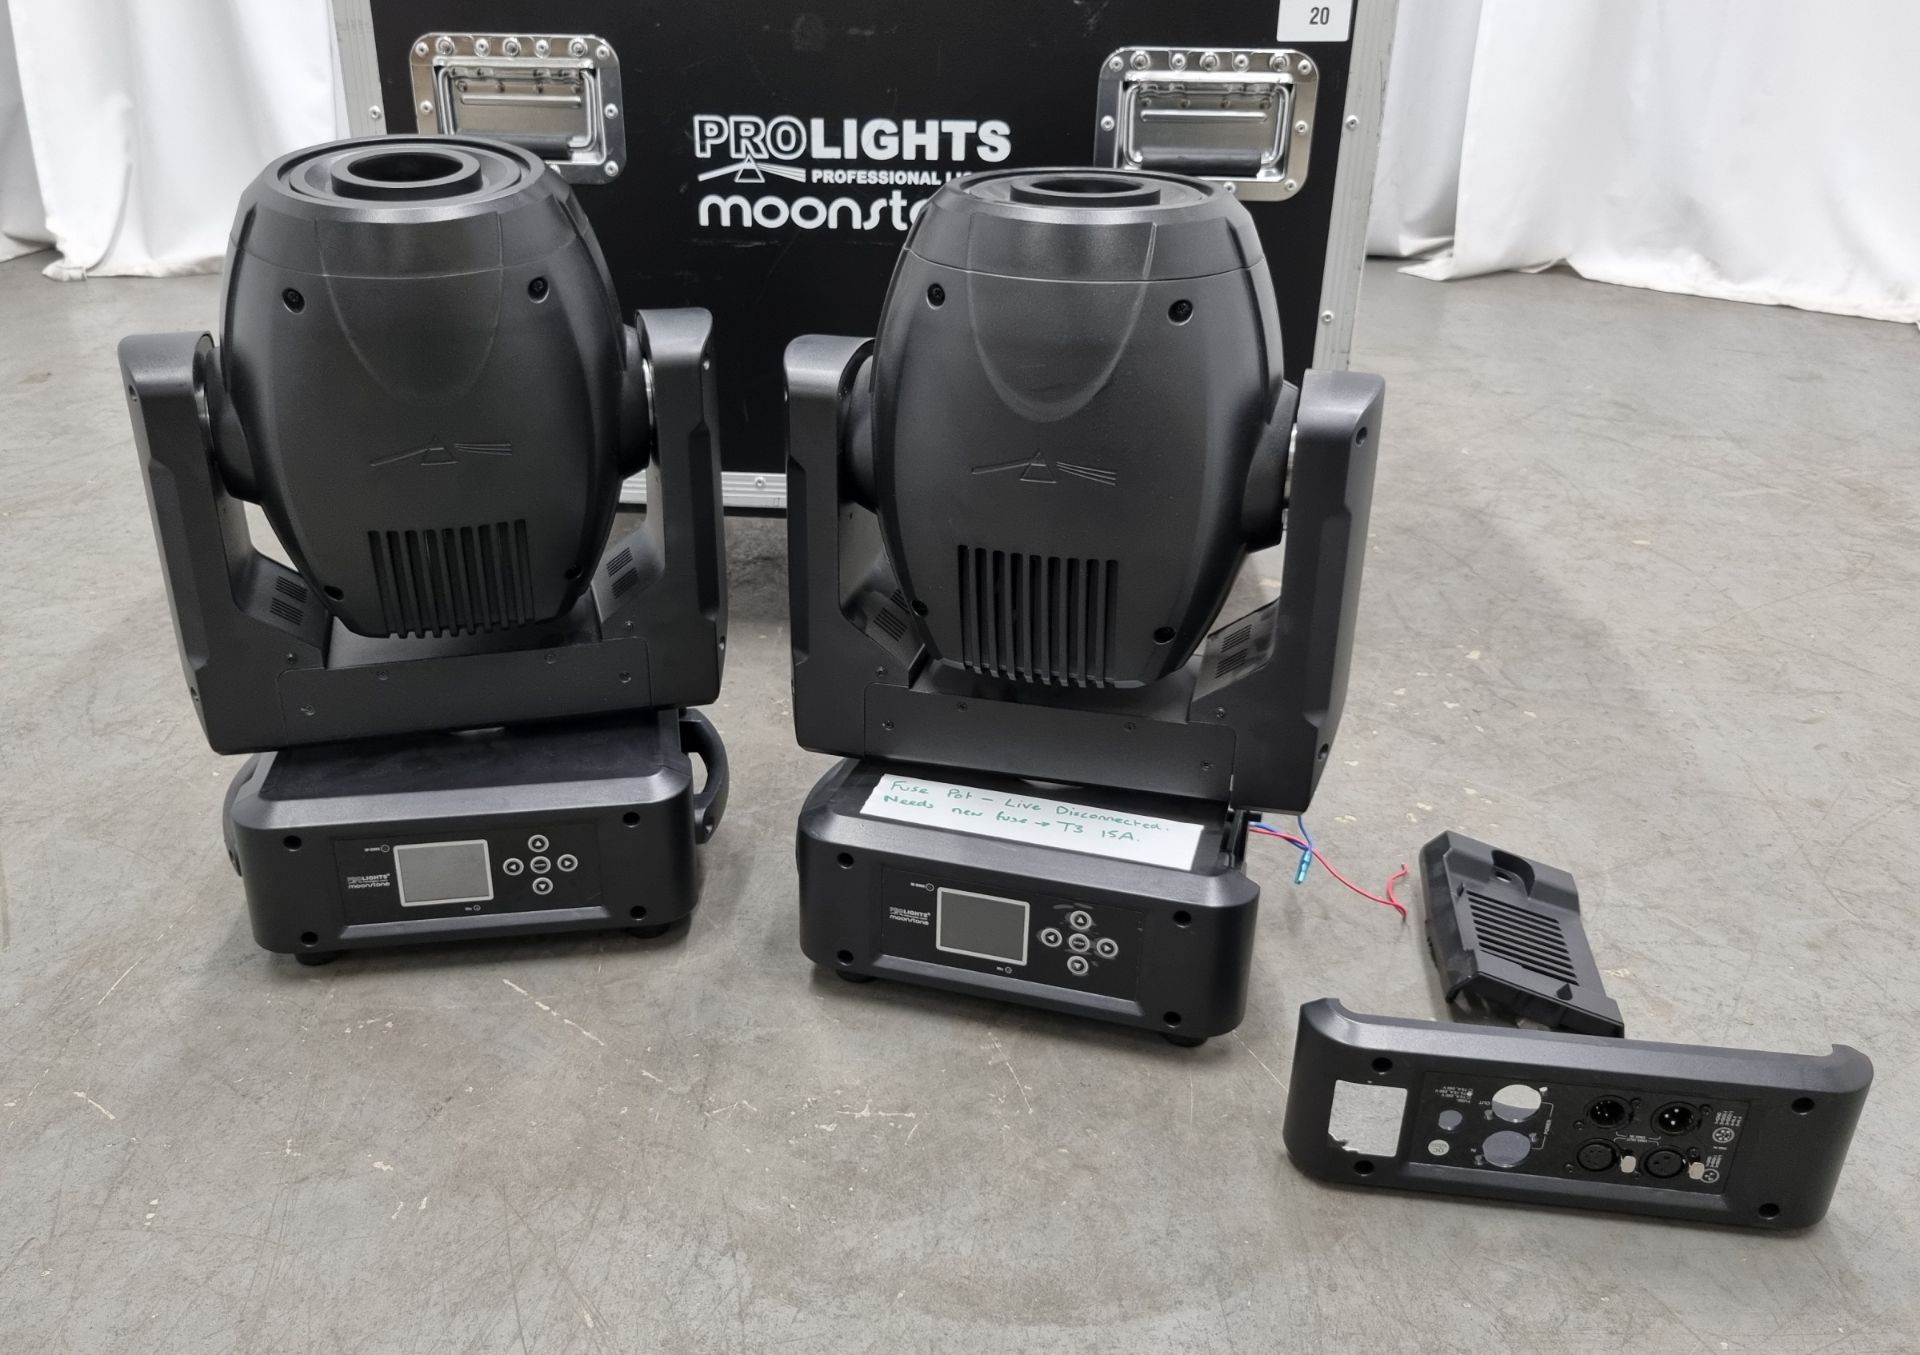 2x Prolights Moonstone LED spot moving head lights with flight case - 1x LIGHT SPARES OR REPAIRS - Image 2 of 14